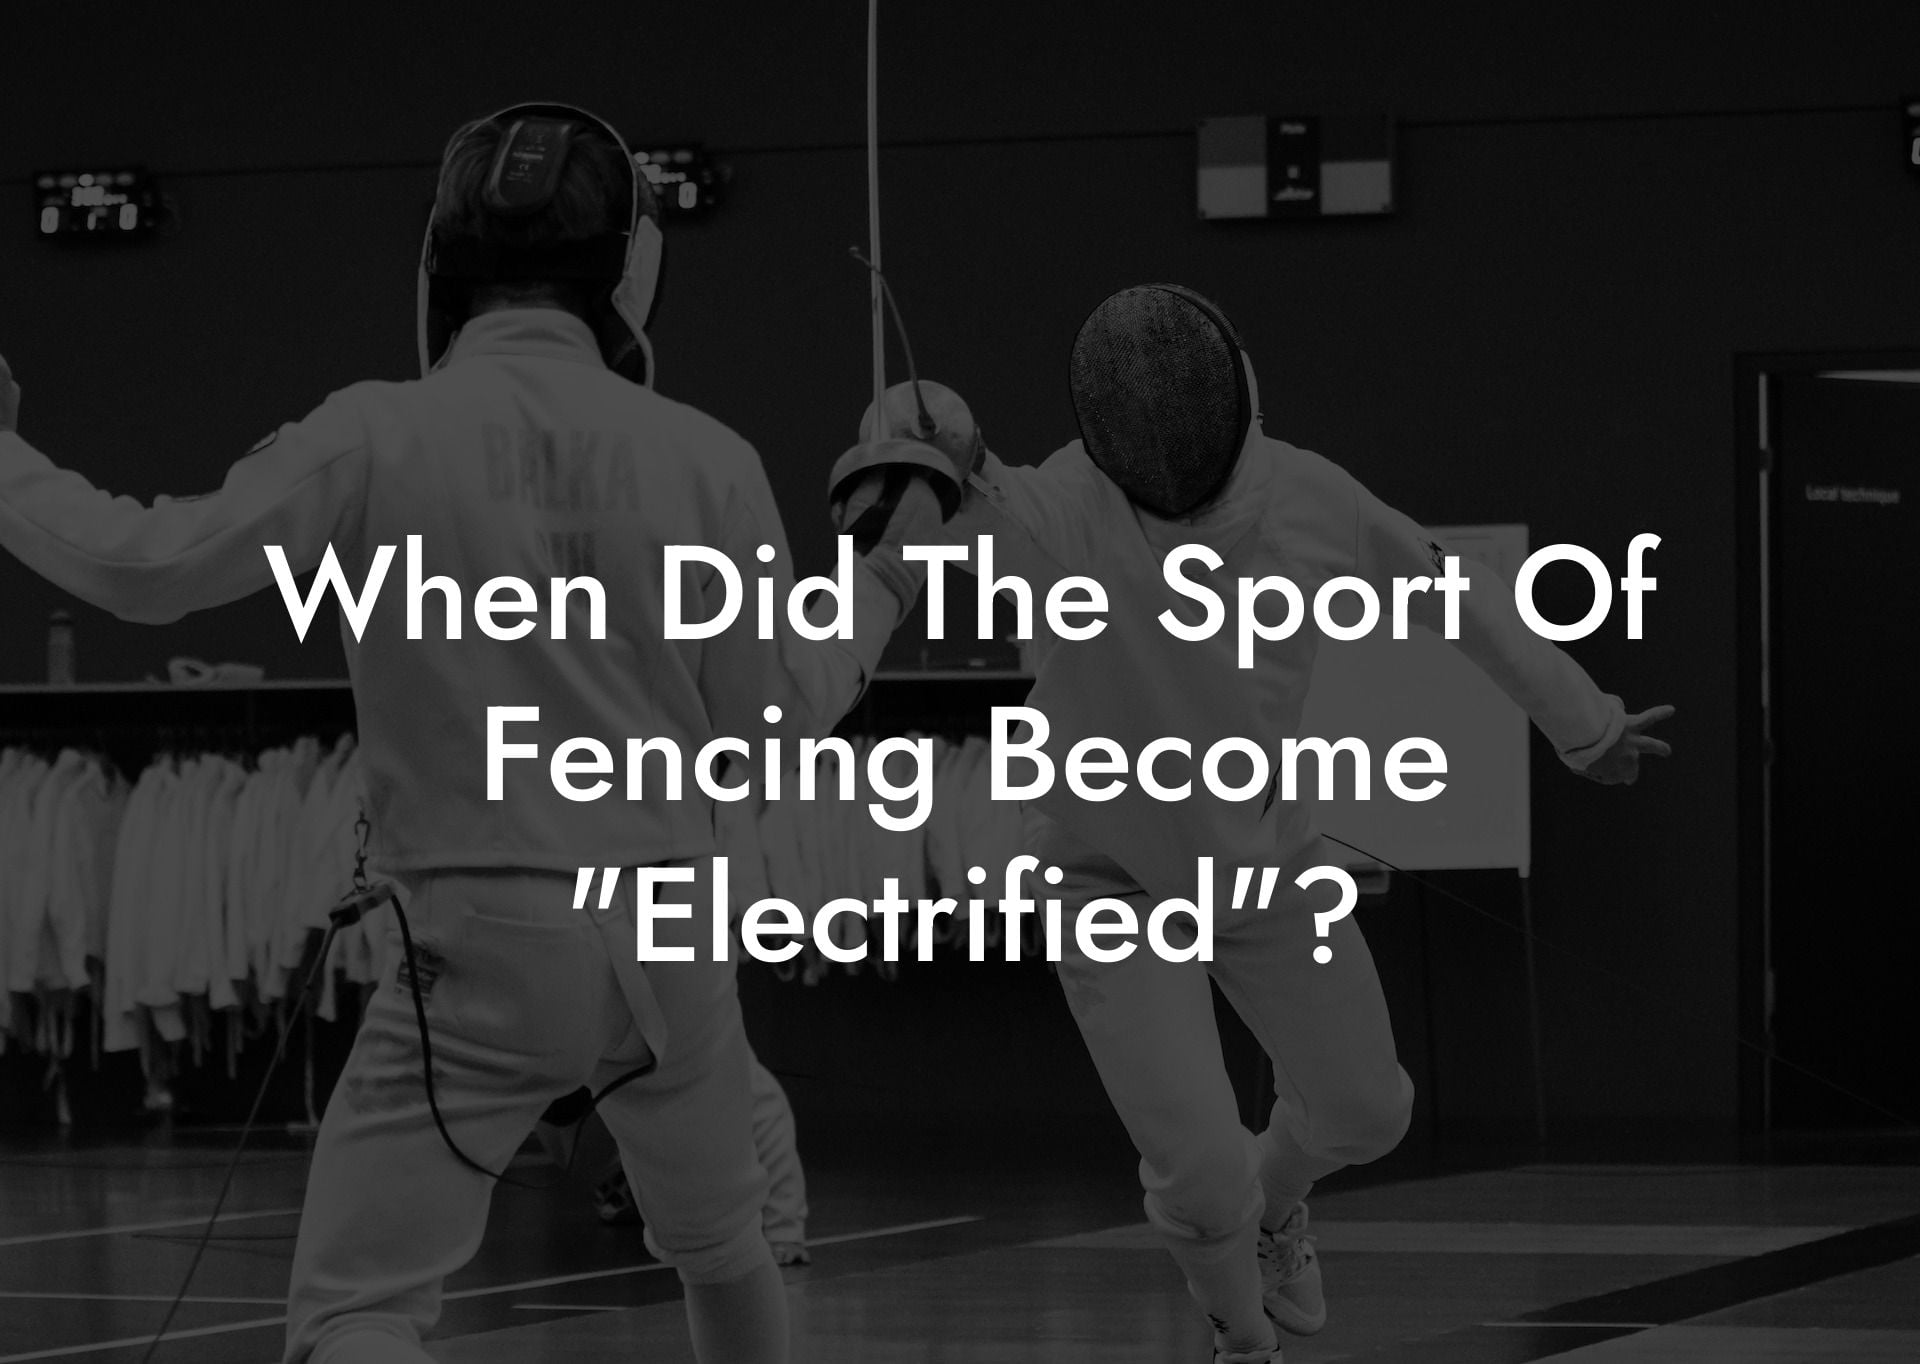 When Did The Sport Of Fencing Become "Electrified"?